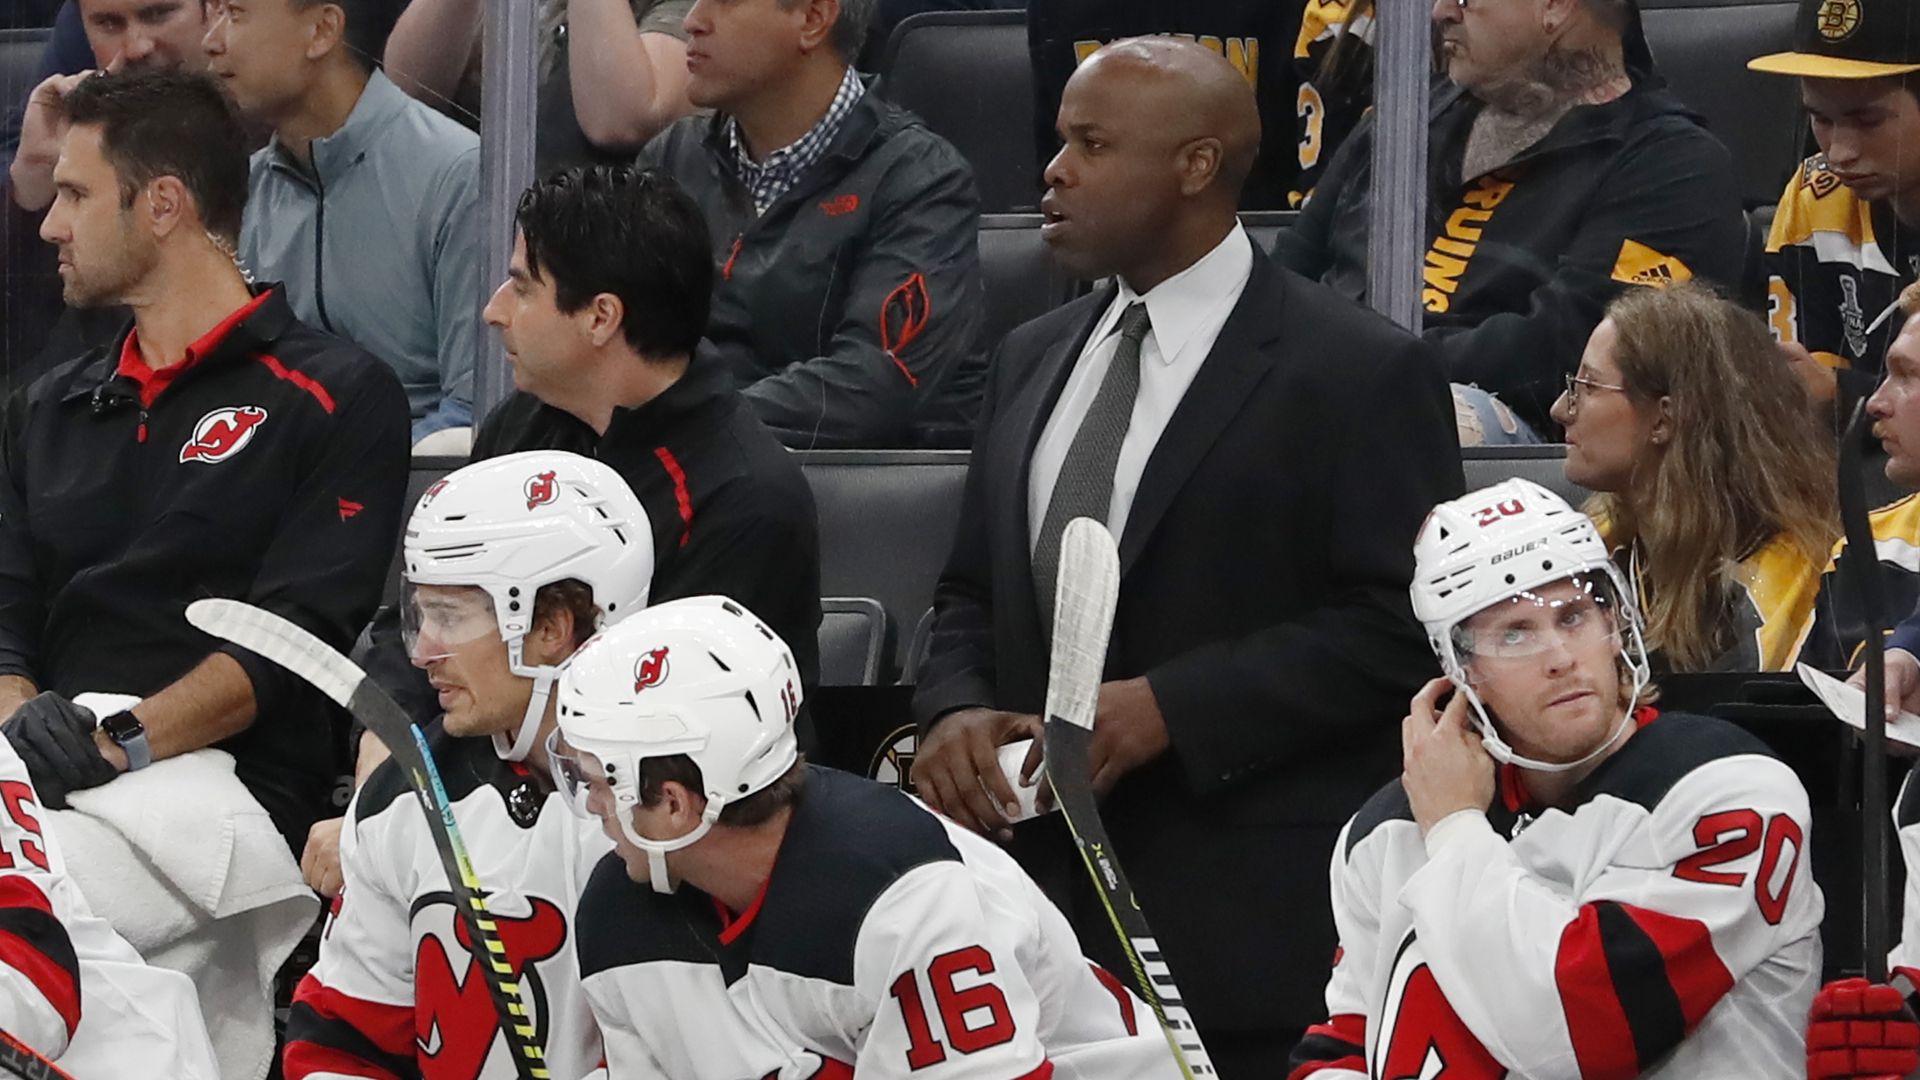 New Jersey Devils assistant coach Mike Grier during a preseason game.